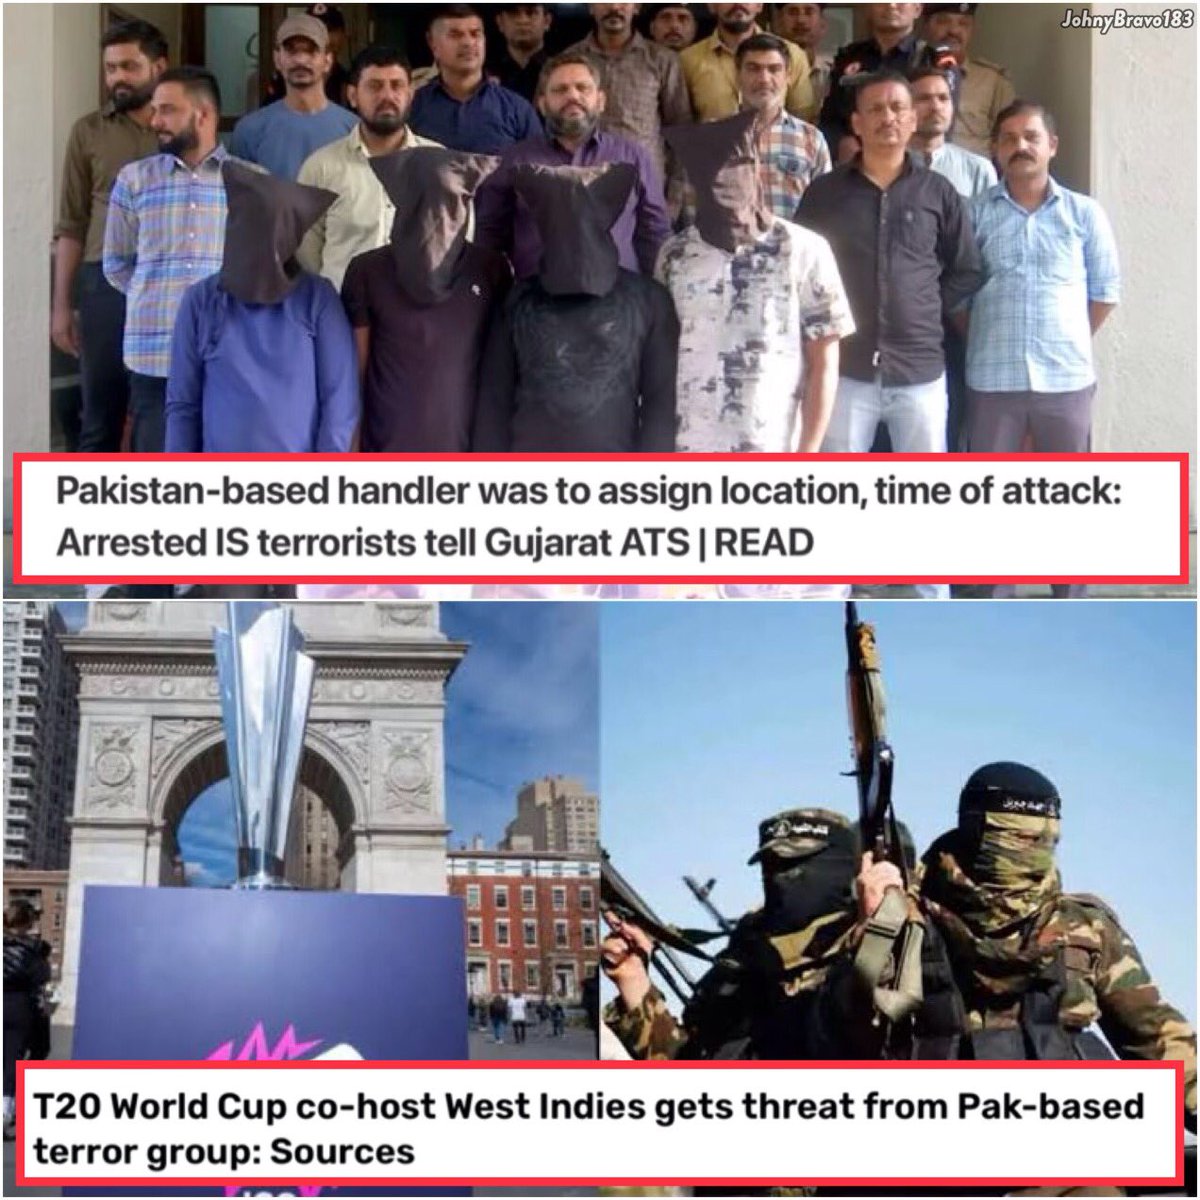 Pakistan gave terr0rist threats to: - IPL playoffs in India - T20 WC in West Indies Still Pakistanis want to host CT 2025 and are begging ICT to play there.